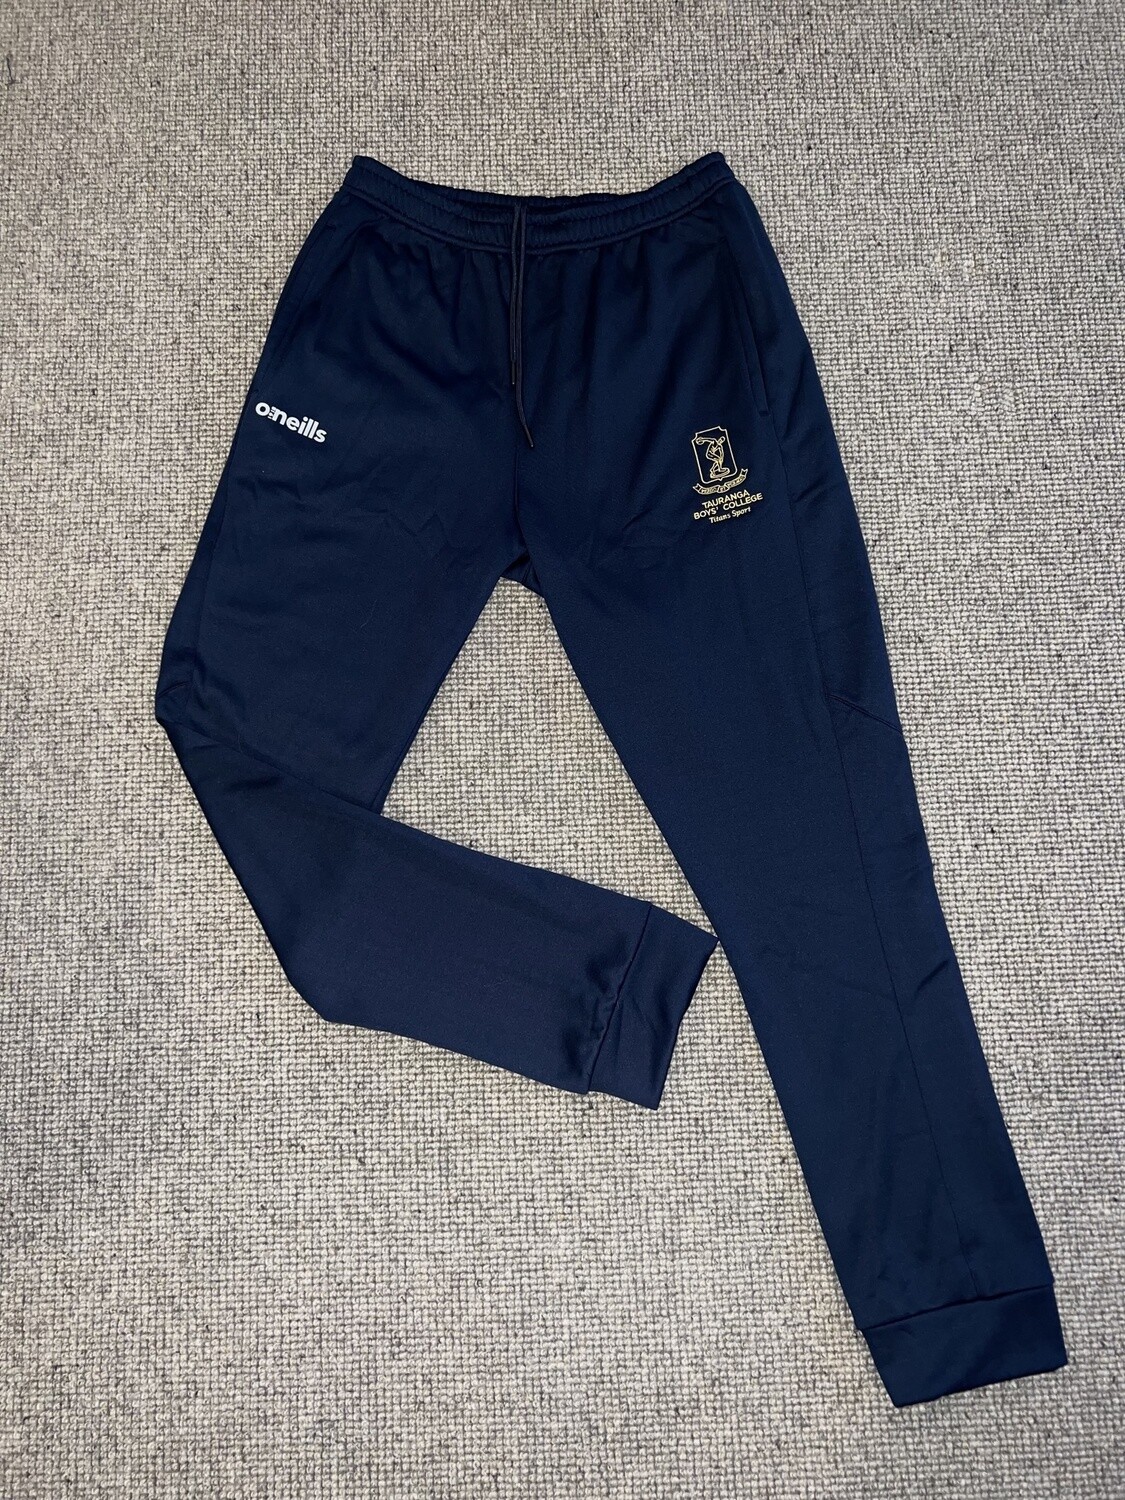 TBC Trackpants (Co-curricular Sport Only)